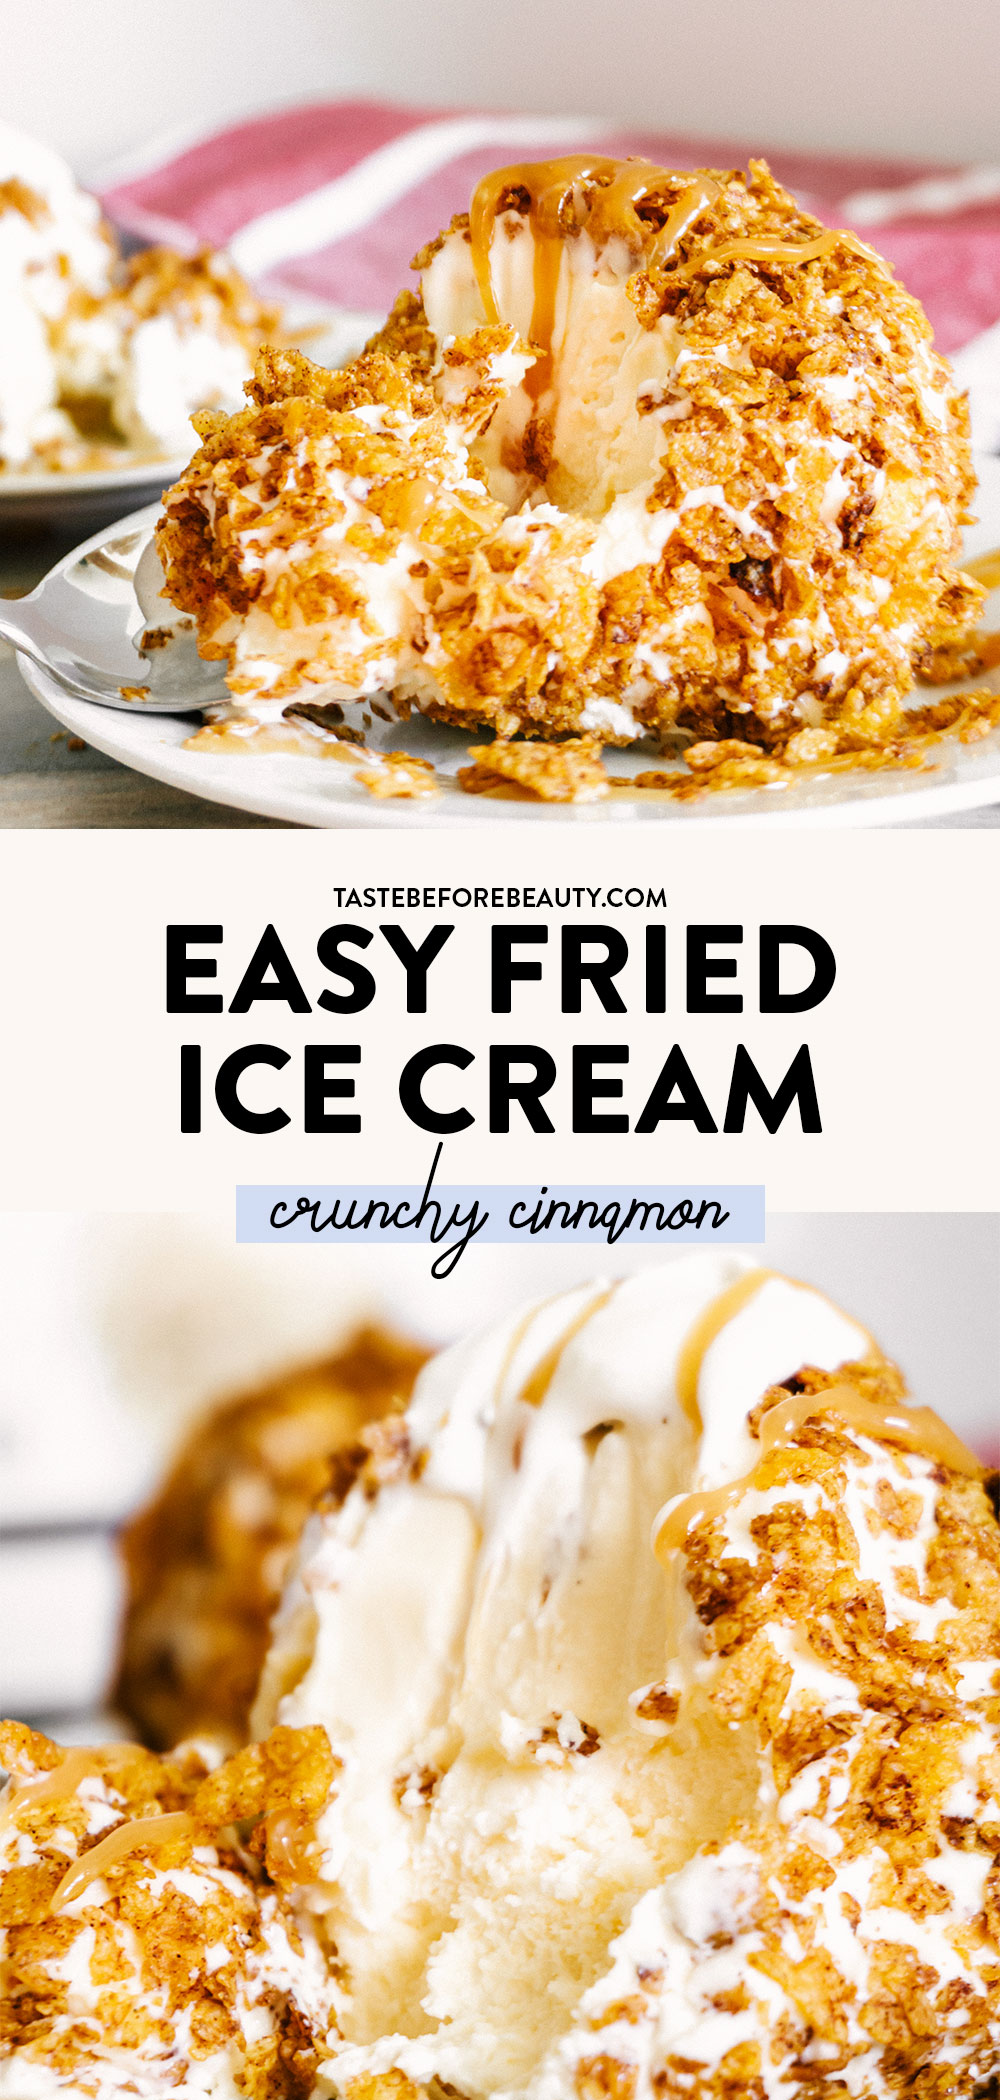 easy fried ice cream balls with cinnamon crunchy coating pinterest pin